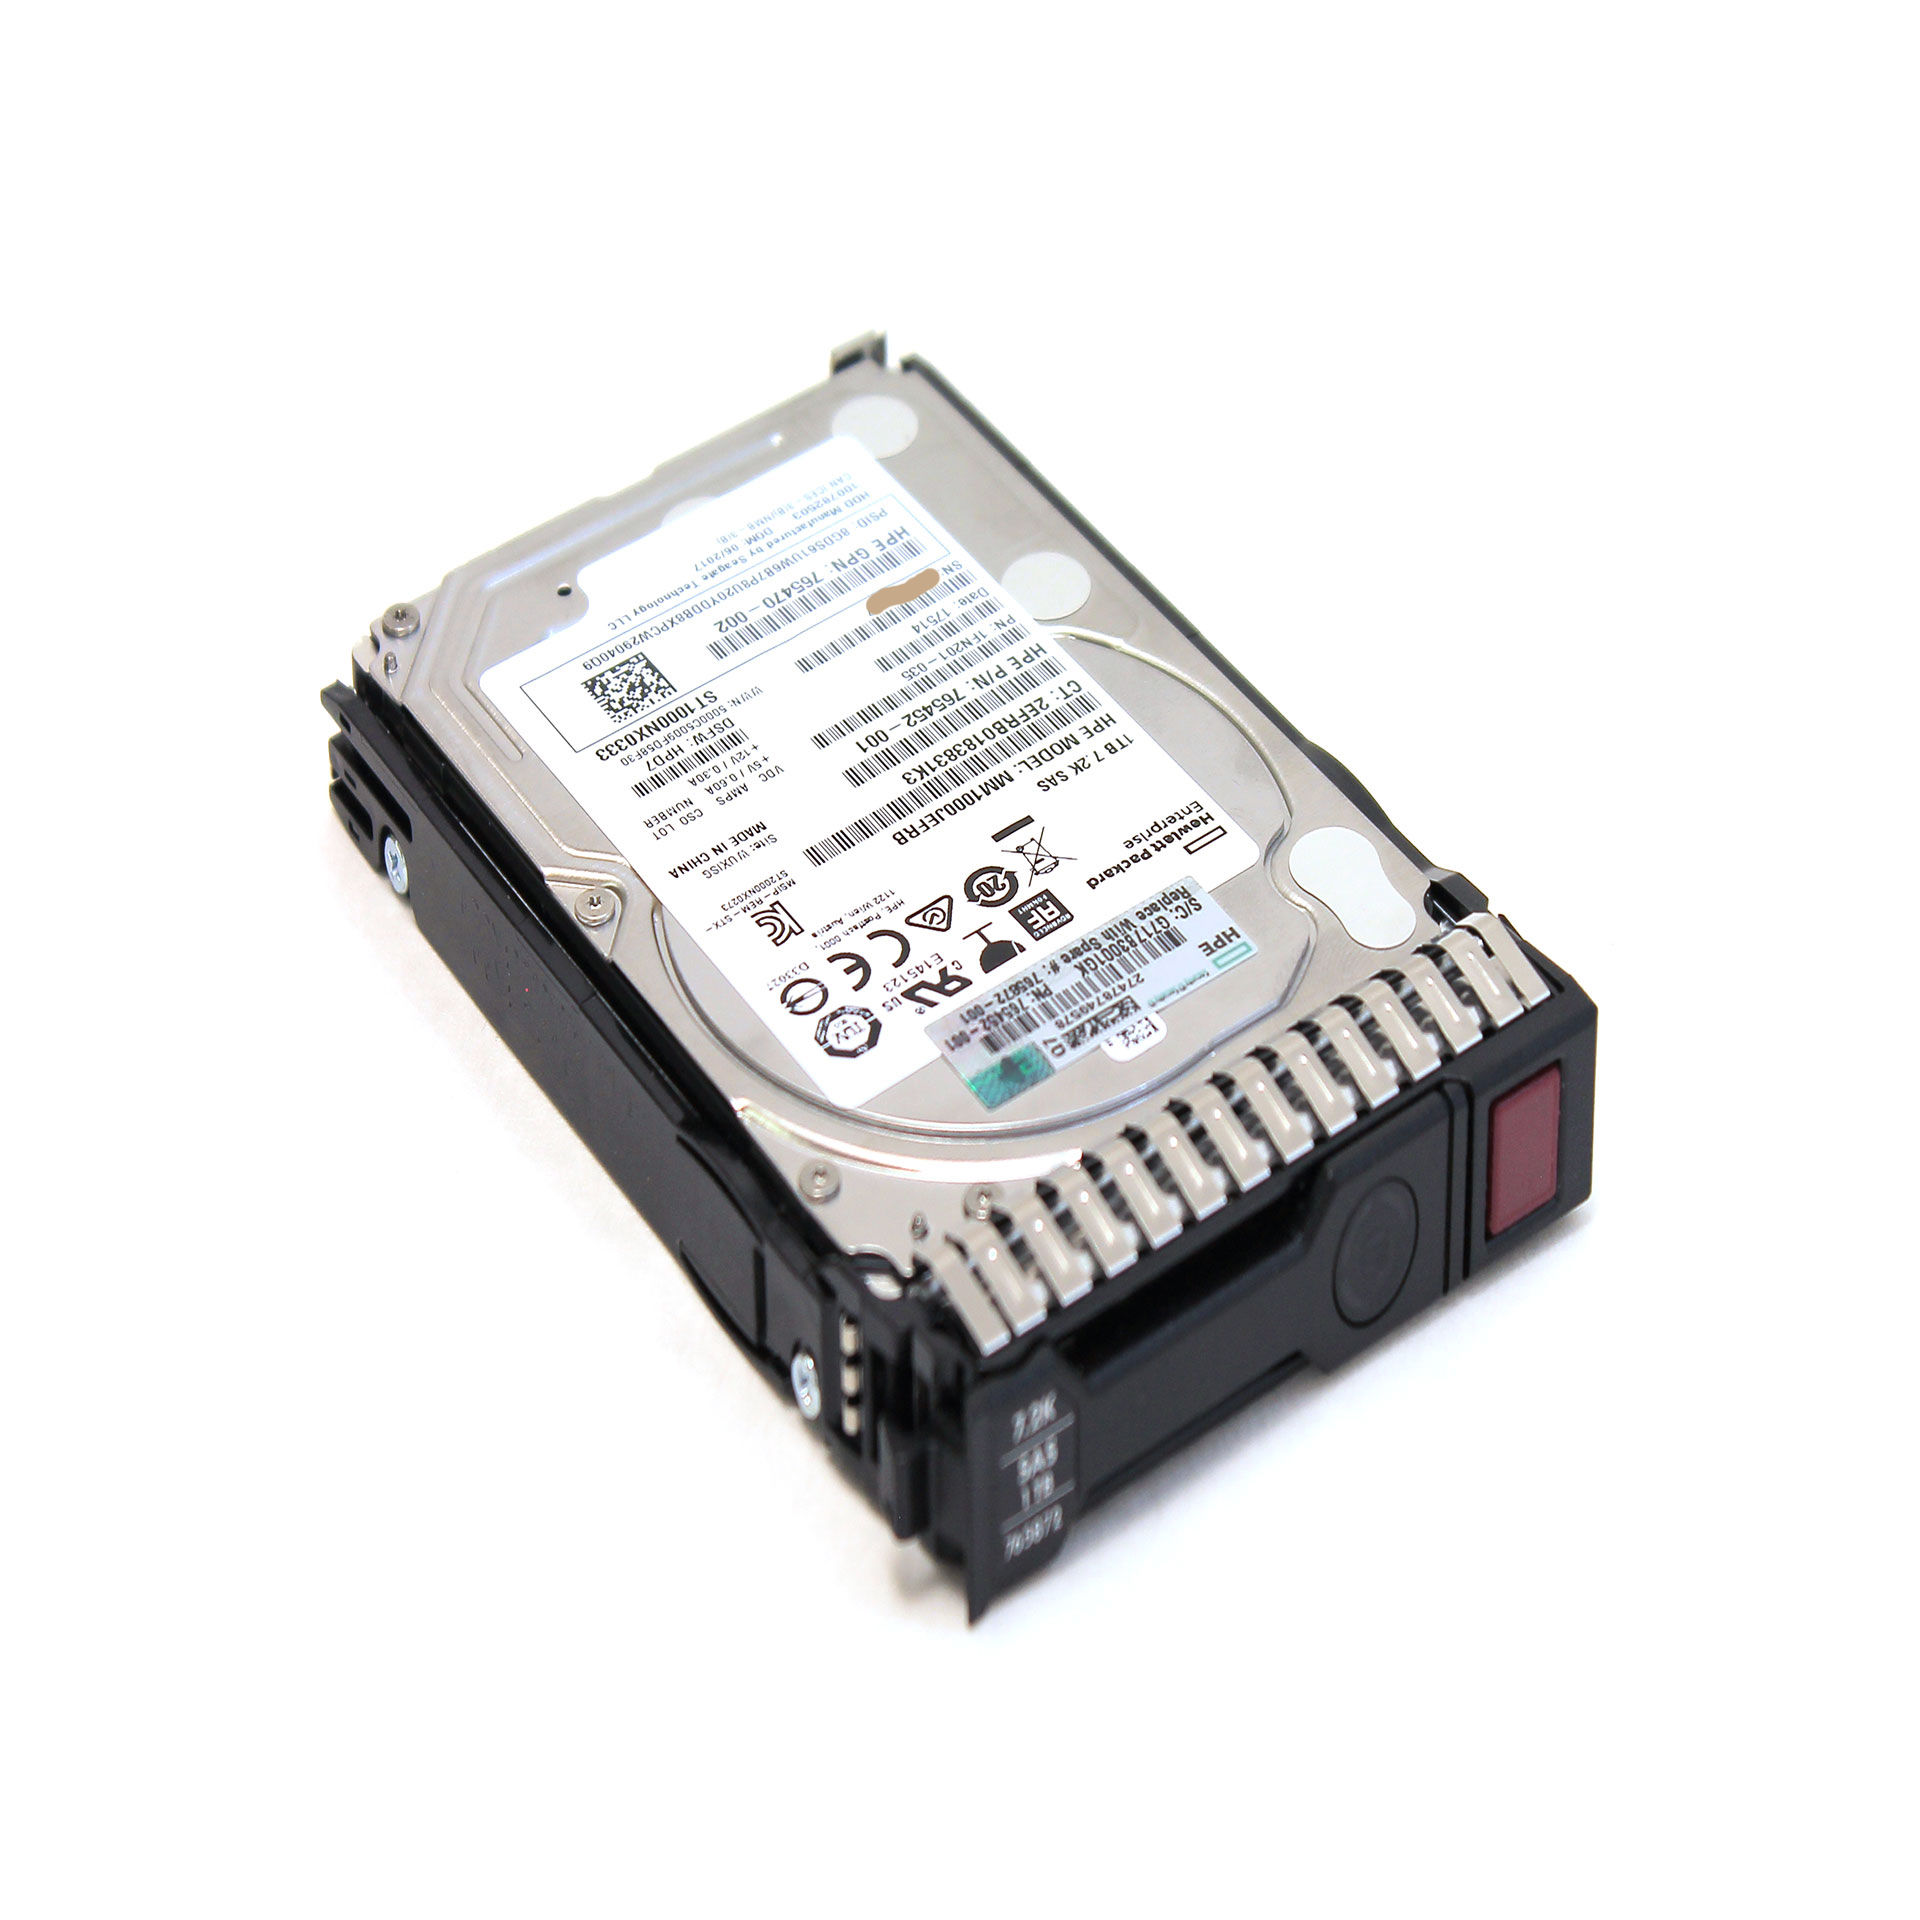 HP Seagate 1 TB Server HDD MM1000JEFRB 765452-001 765872-001